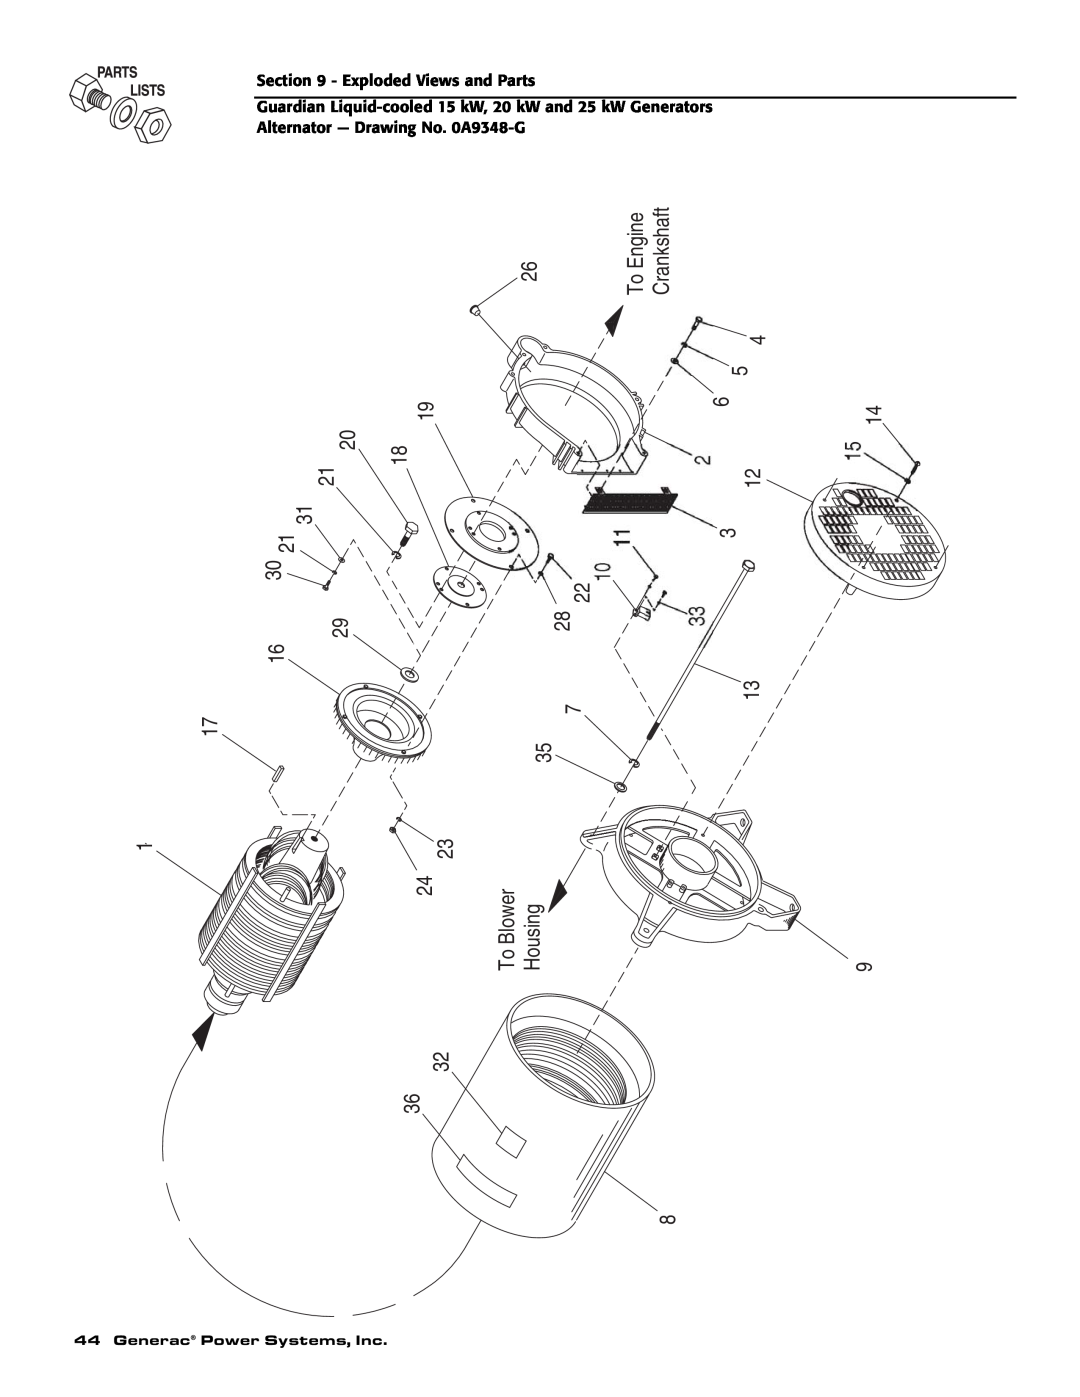 Guardian Technologies 004723-0, 004725-3, 004726-0 16 30, To Engine Crankshaft, To Blower Housing, Exploded Views and Parts 